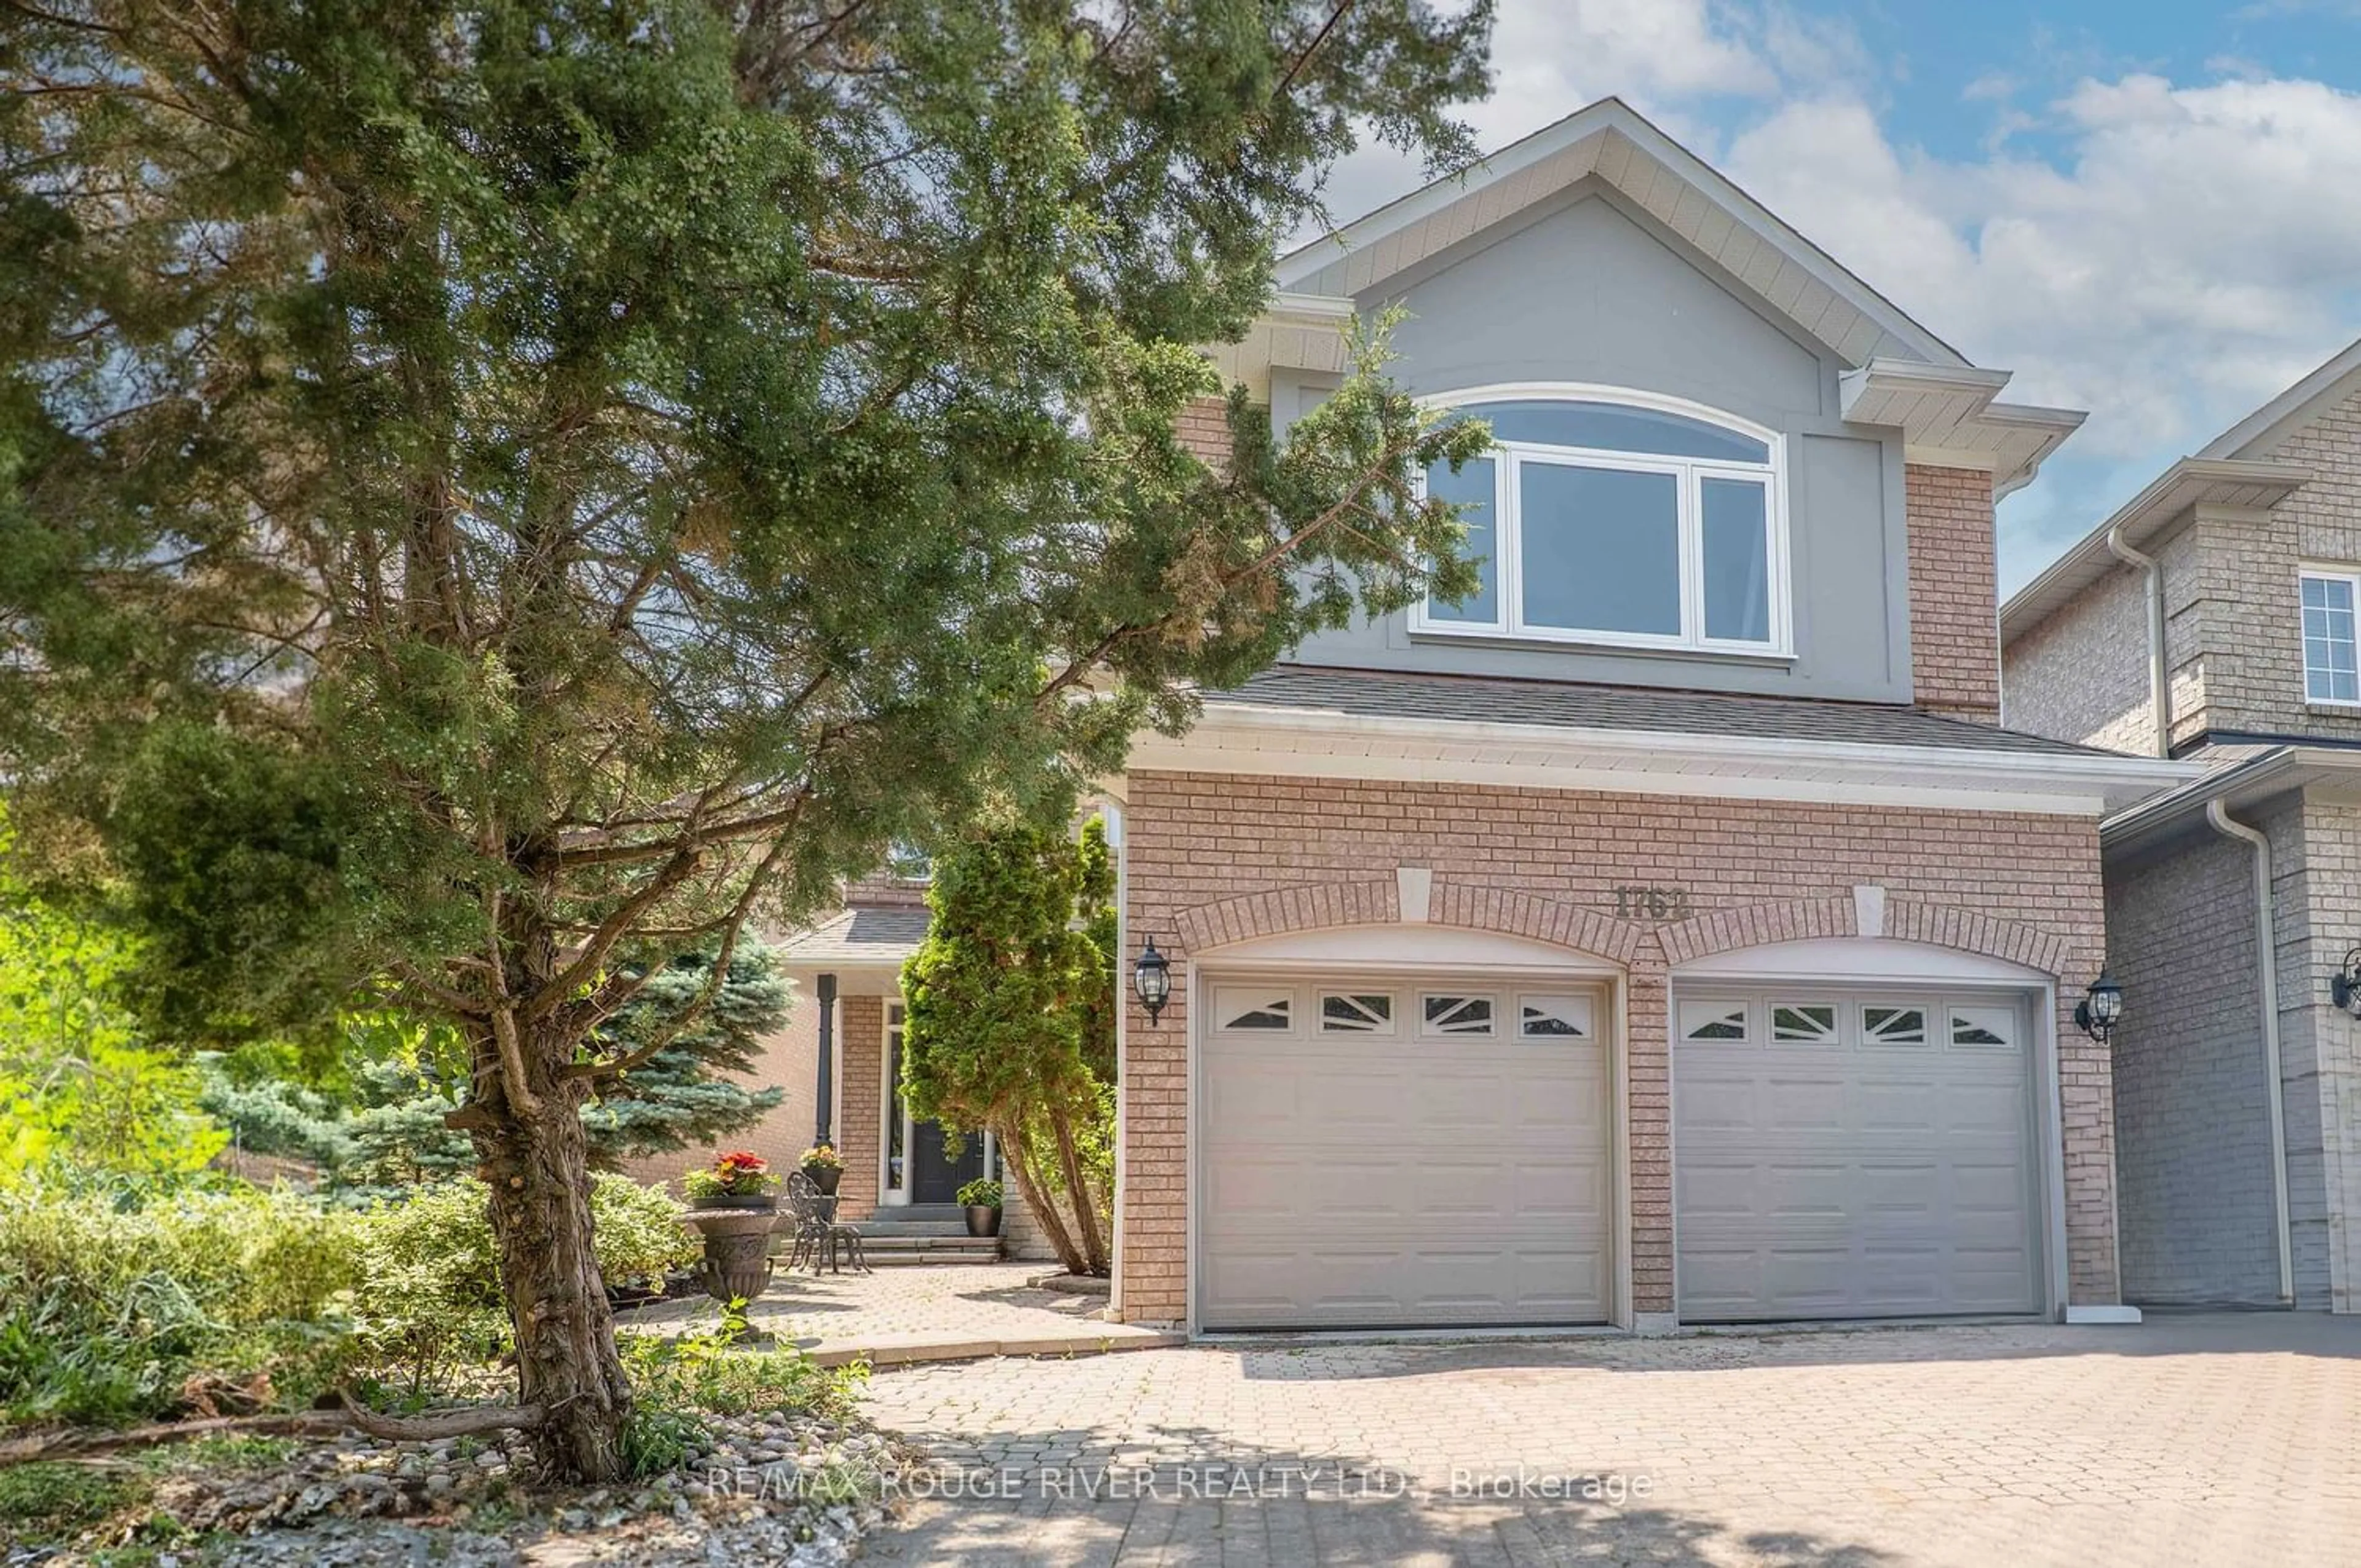 Home with brick exterior material for 1762 White Cedar Dr, Pickering Ontario L1V 6Z1